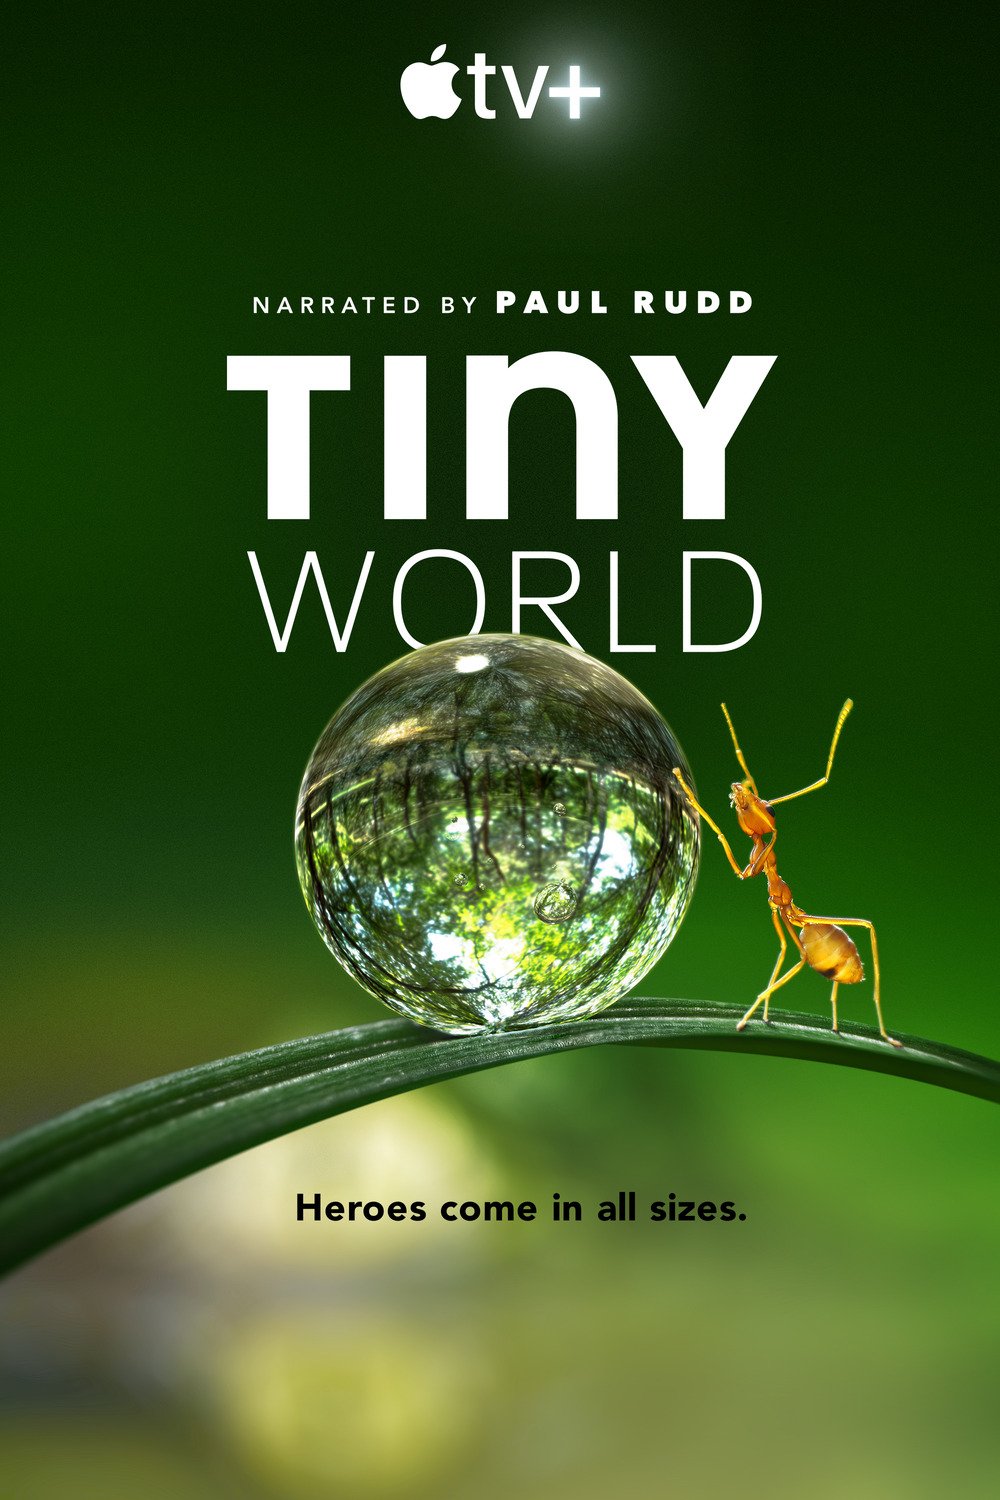 Poster of the movie Tiny World